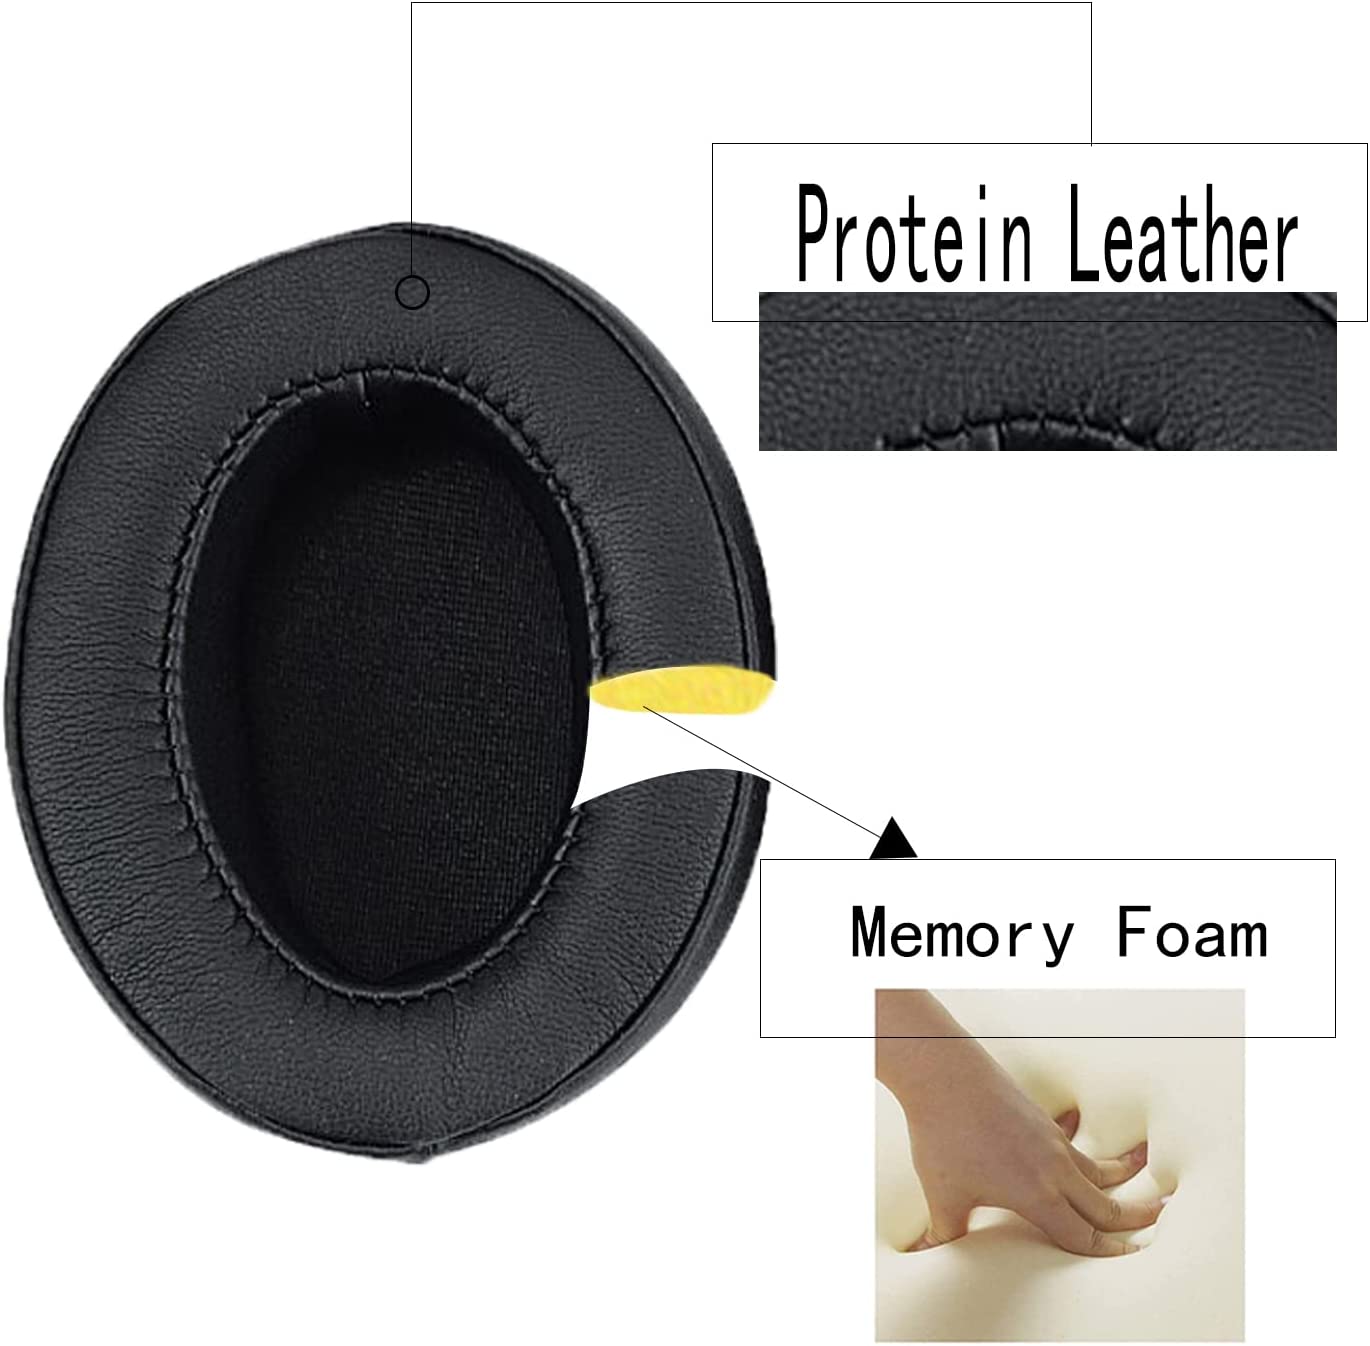 Aiivioll Momentum 2.0 Replacement Earpads Quite-Comfort Protein Leather Ear Cushion Cover Earmuff Repair Part for Sennheiser HD1 Momentum1.0 Momentum 2.0 Over-Ear Headset(Black +Black Net) - image 5 of 8